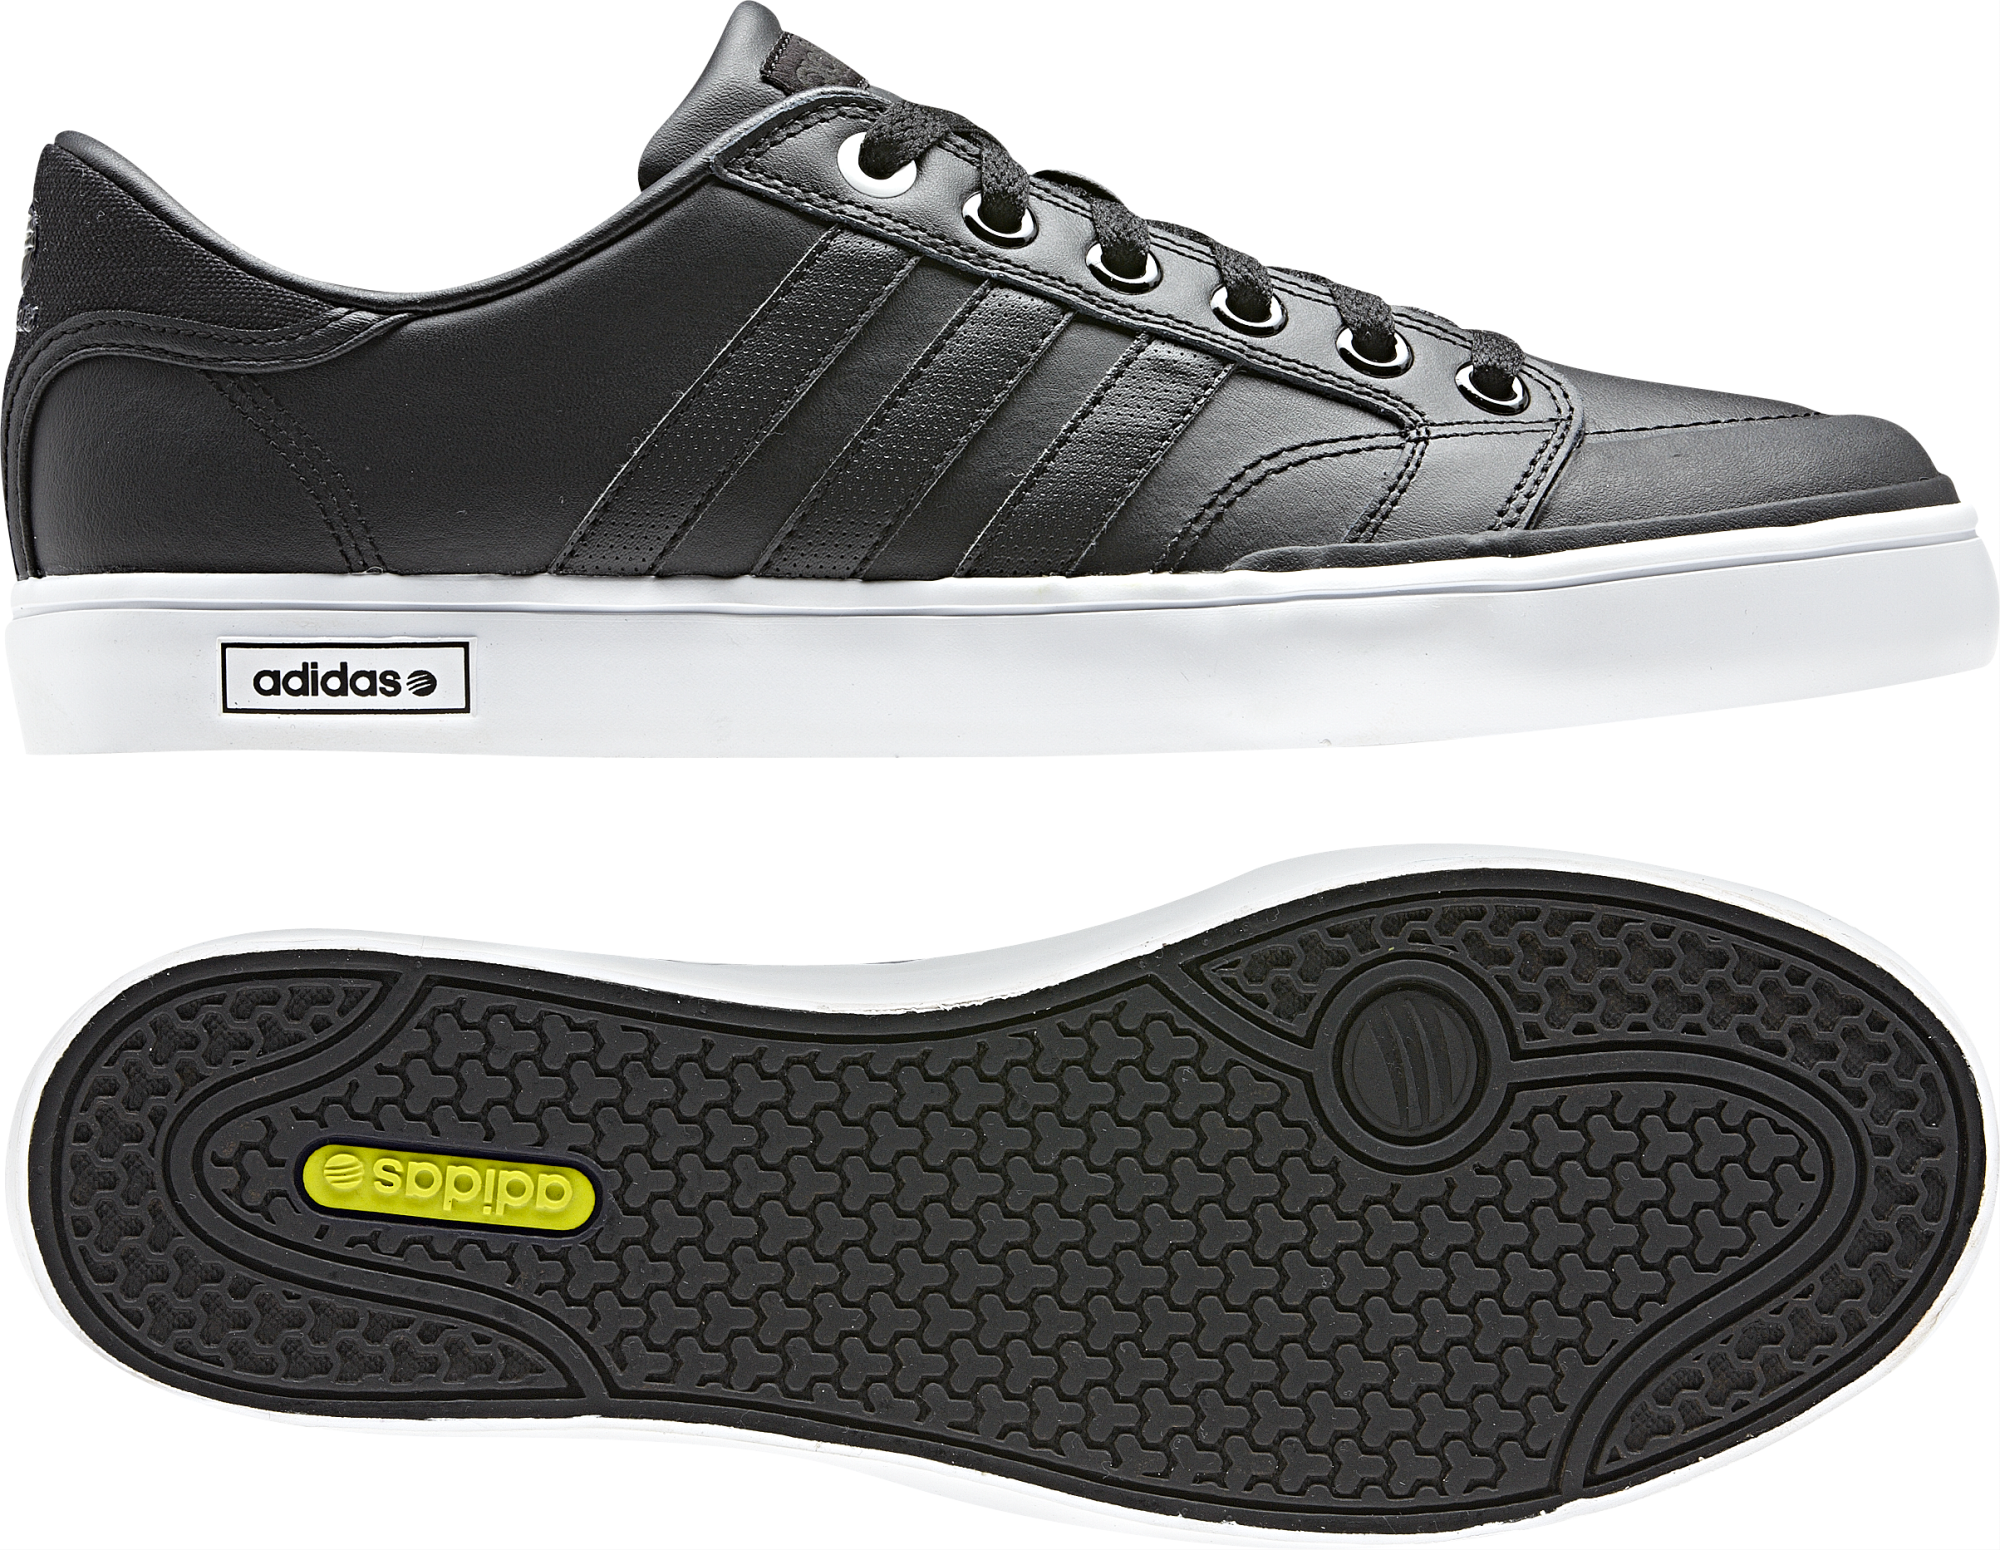 adidas neo clemente